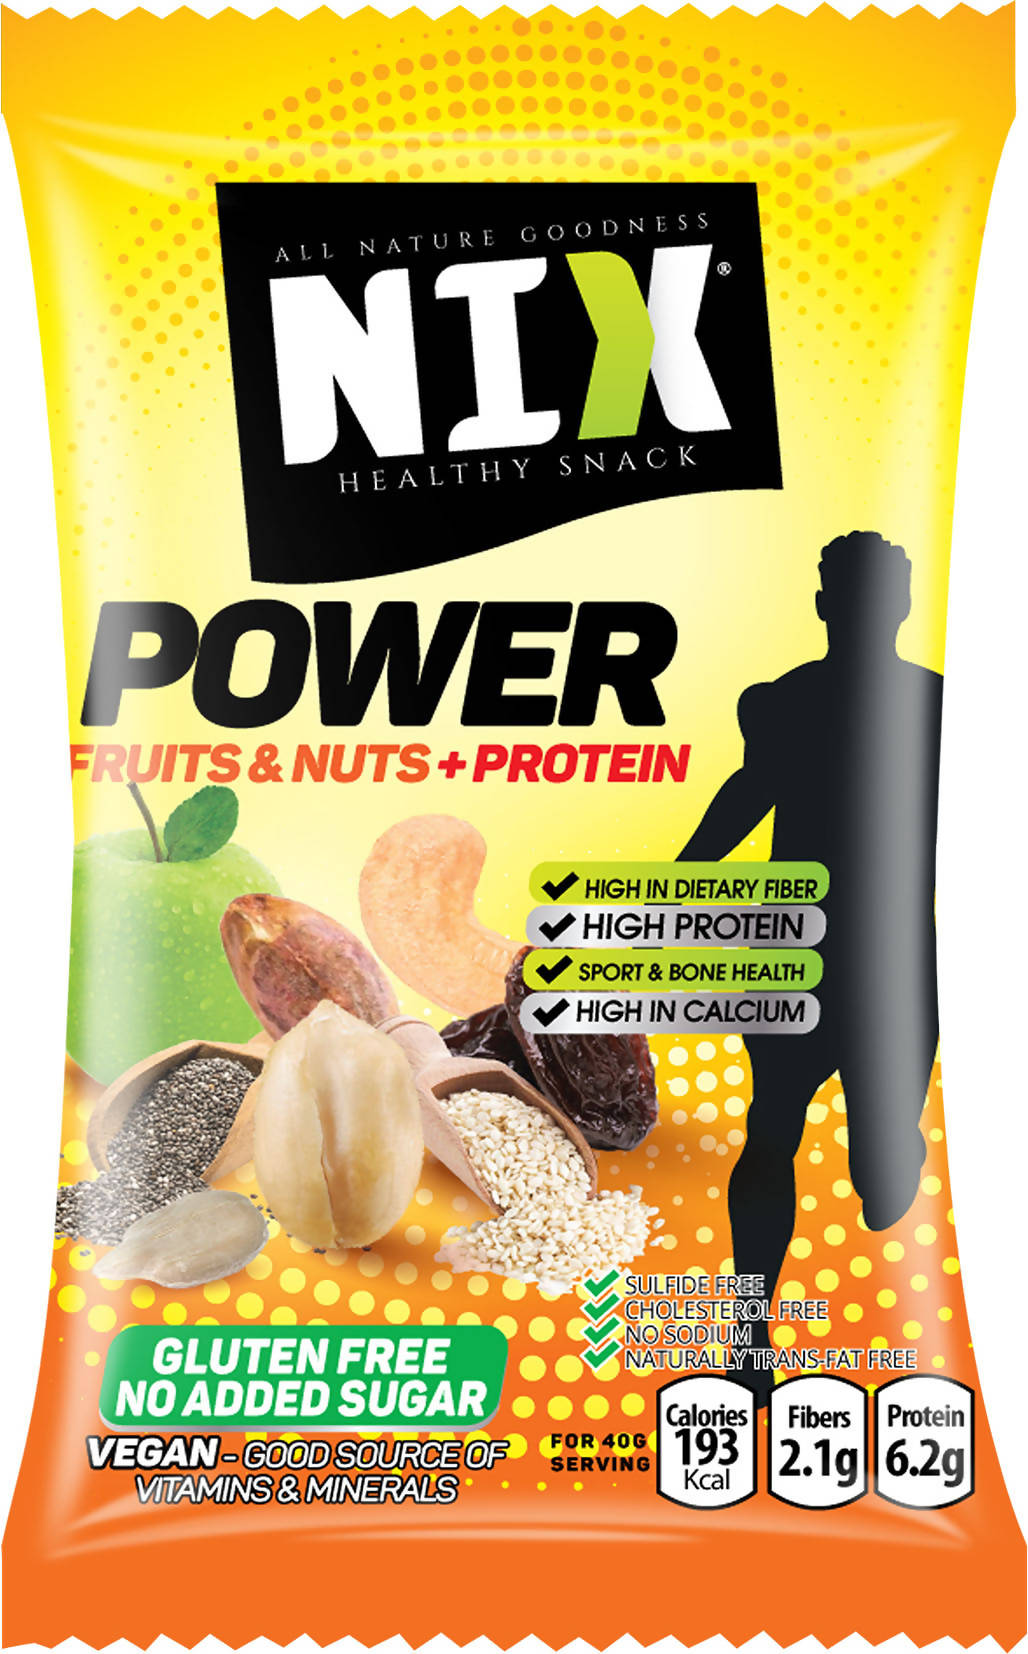 NIX "Power" Fruits & Nuts Protein